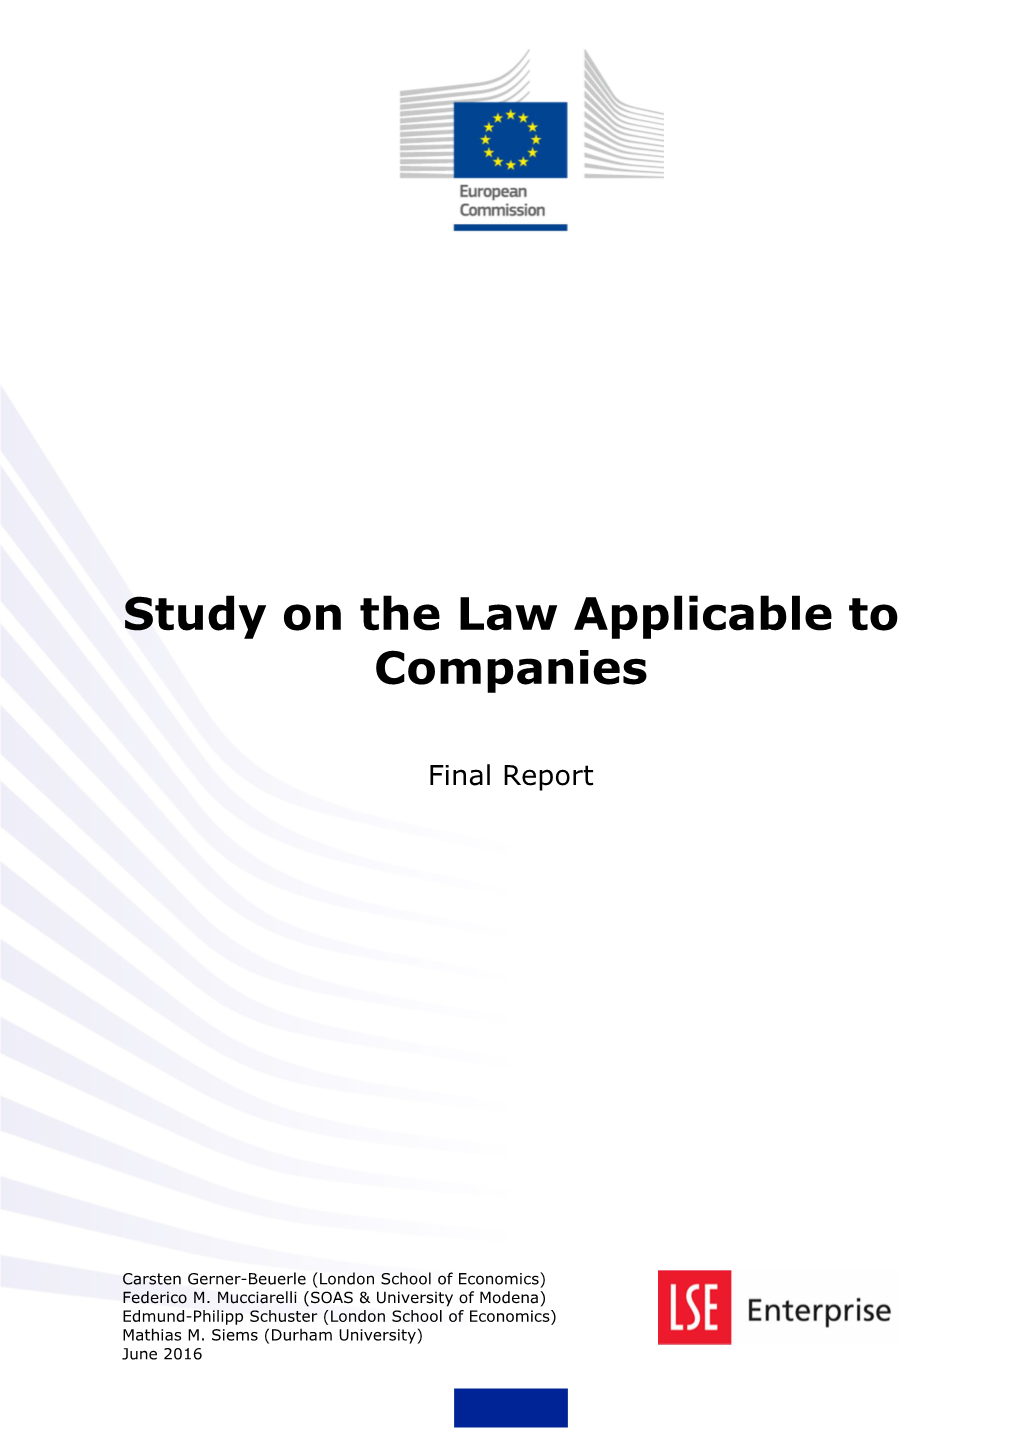 Study on the Law Applicable to Companies